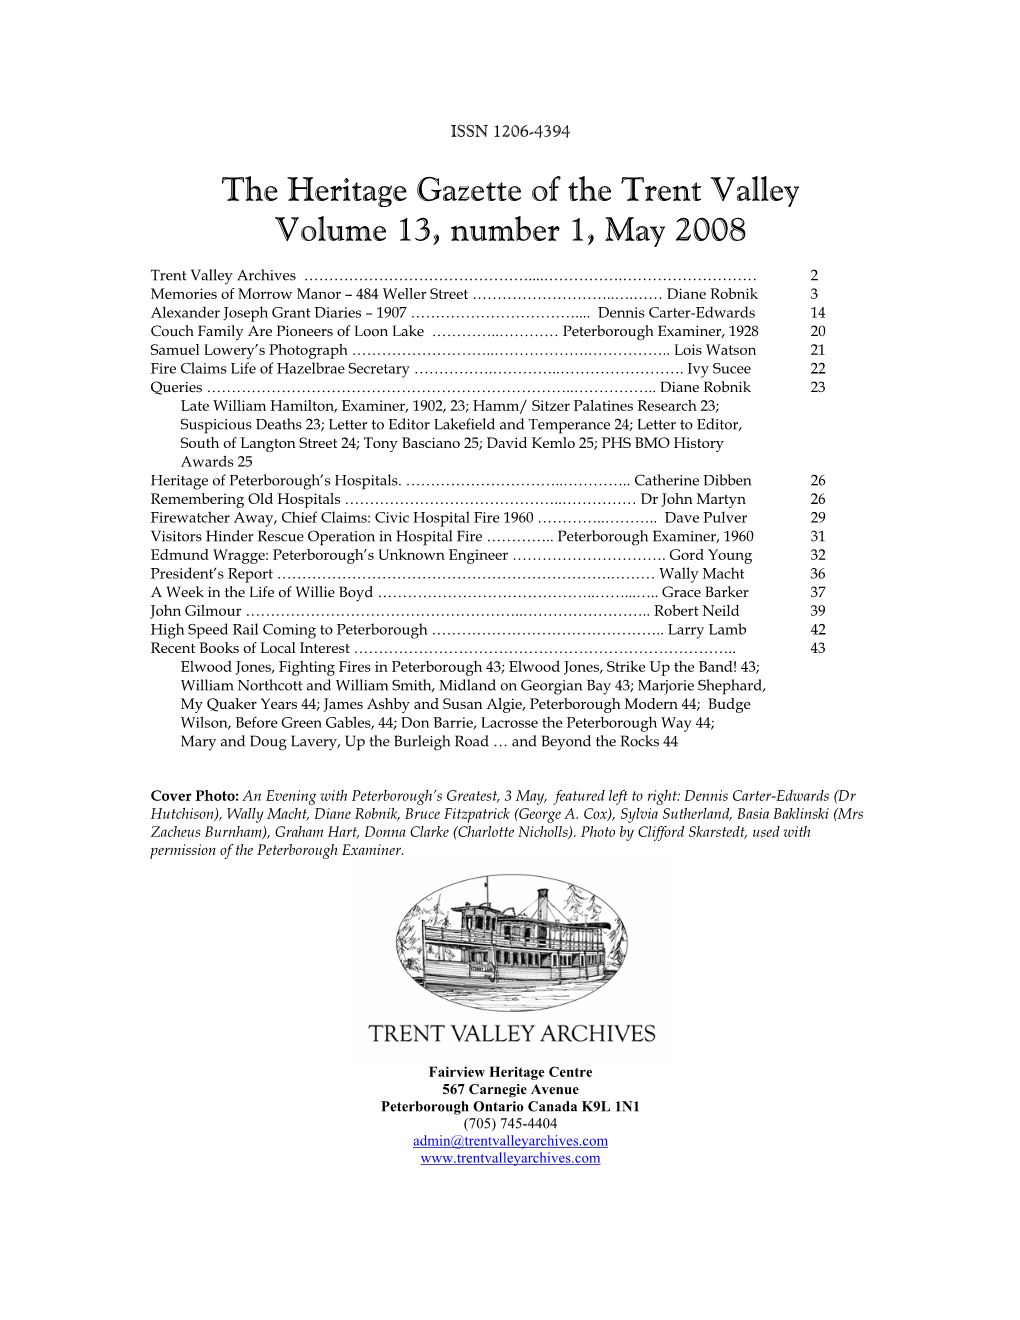 The Heritage Gazette of the Trent Valley Volume 13, Number 1, May 2008